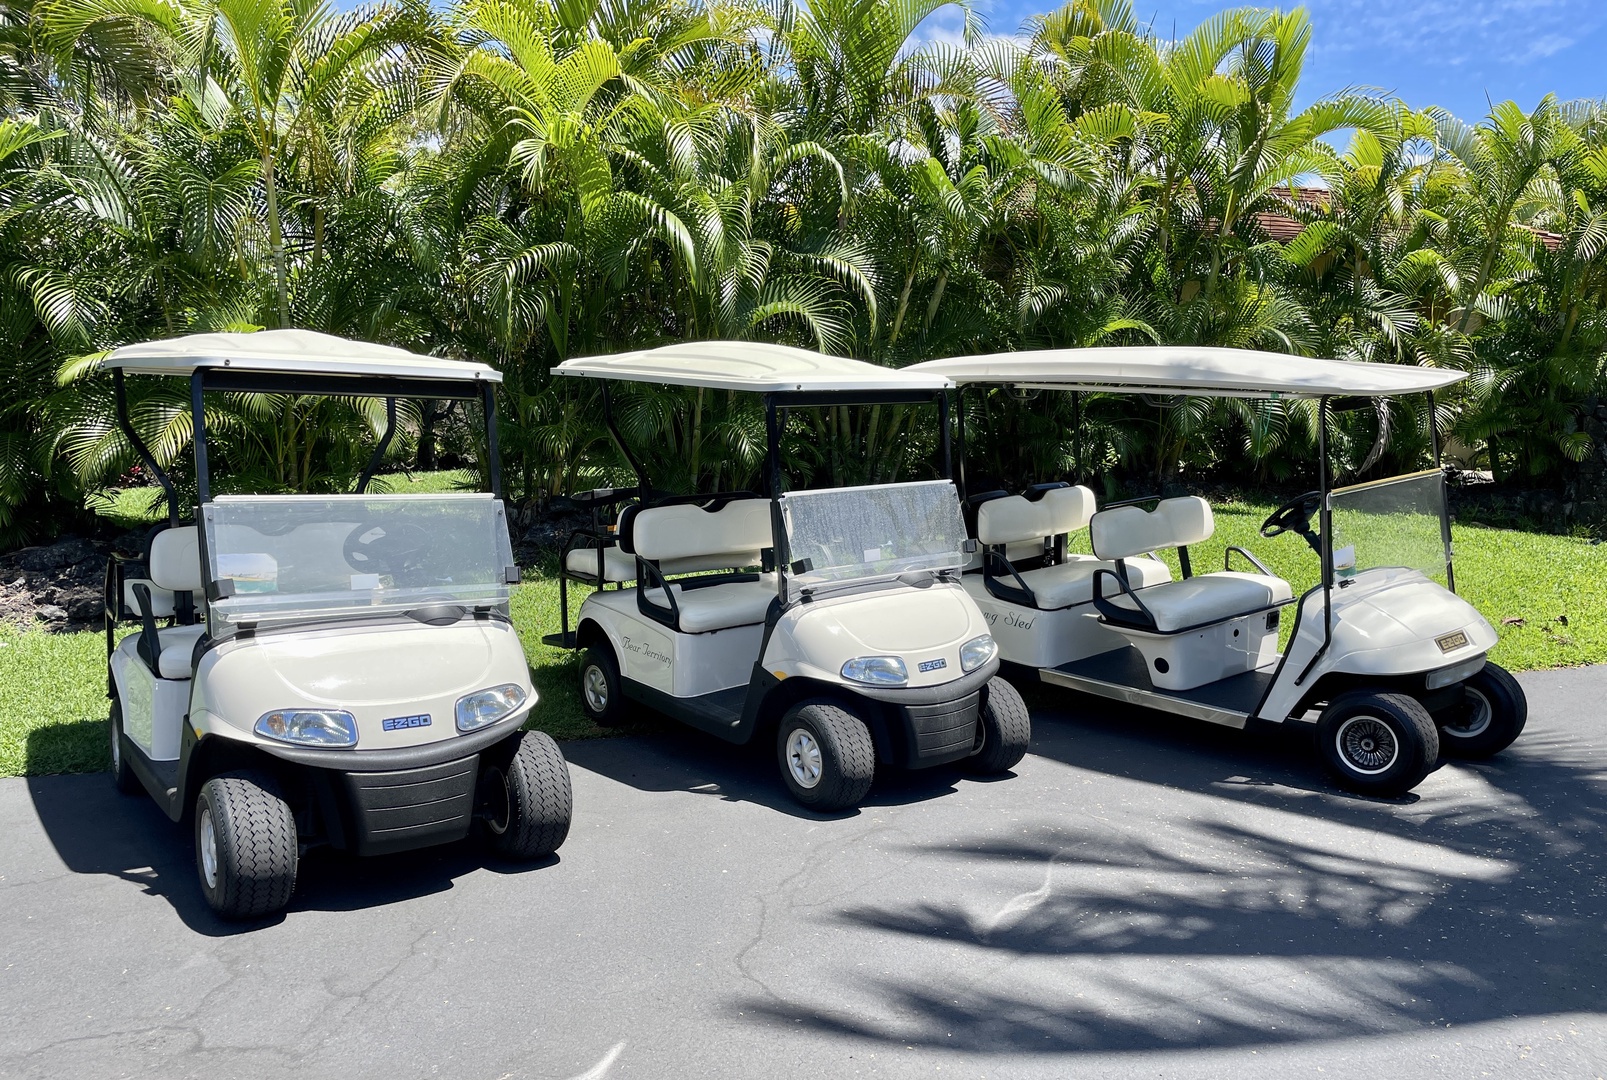 Kailua Kona Vacation Rentals, 4BD Kahikole Street (218) Estate Home at Four Seasons Resort at Hualalai - The estate offers two 4-seater golf carts & one 6-seater golf cart for your use